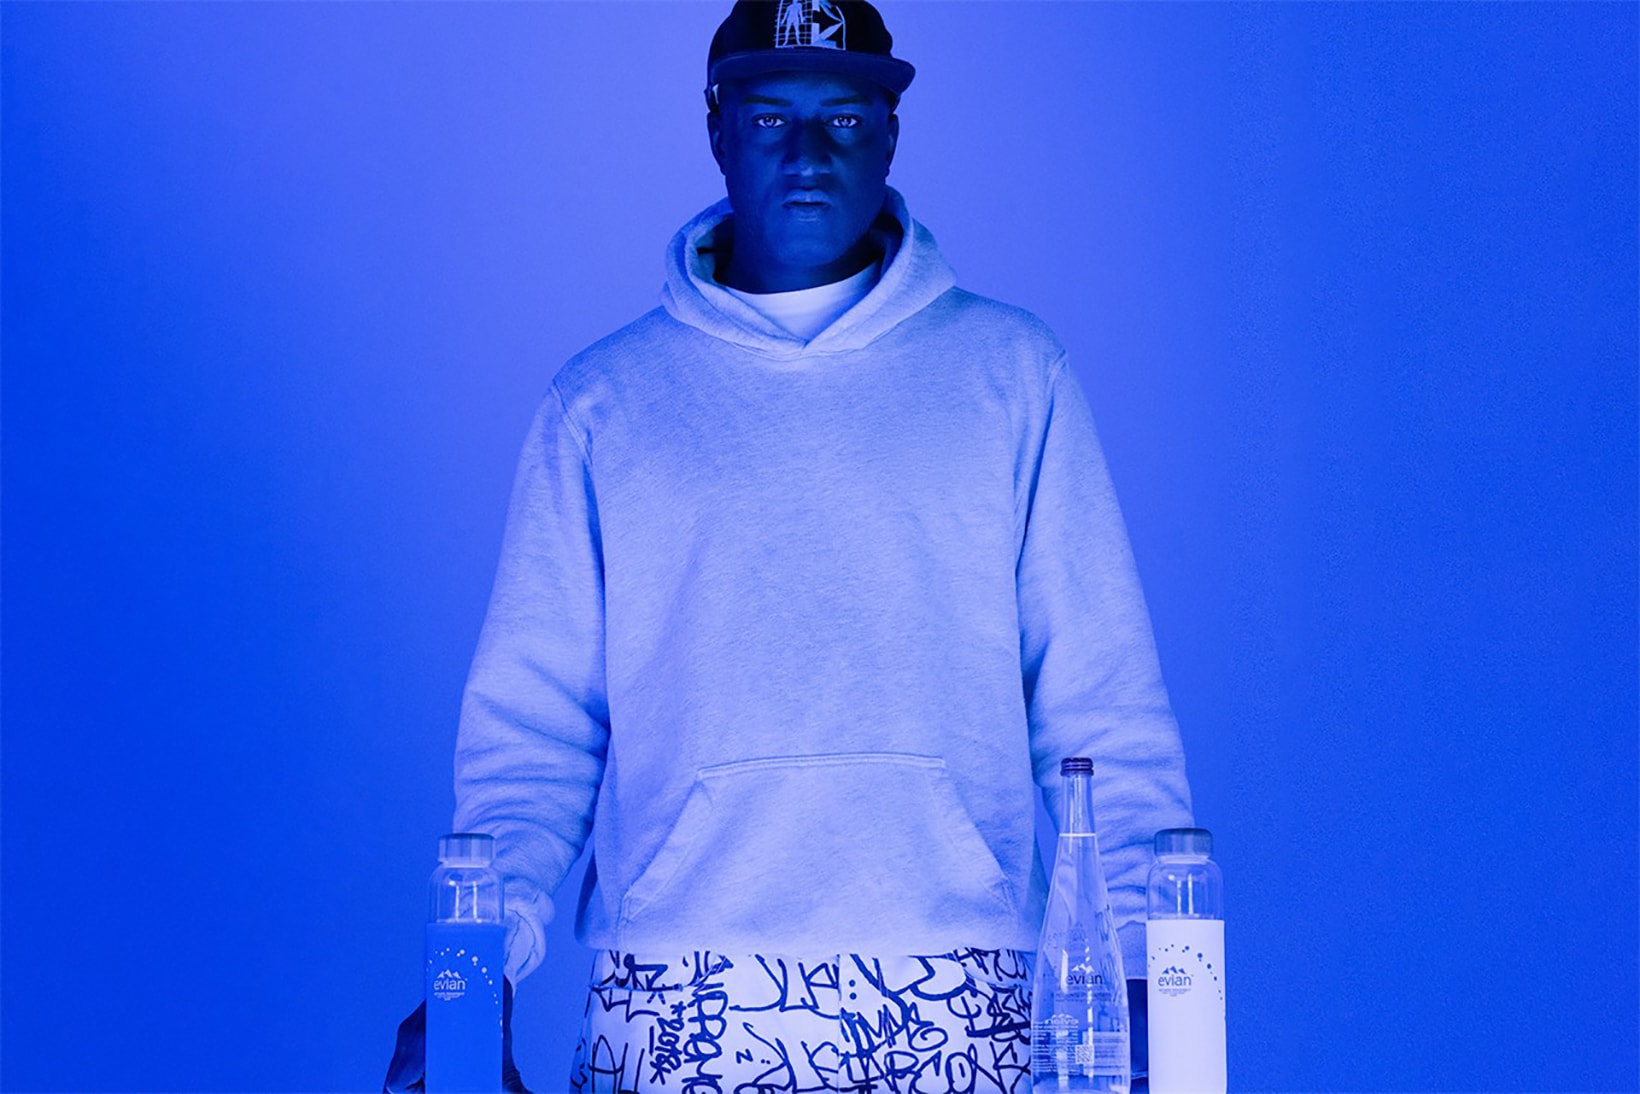 virgil abloh evian water collaboration activate movement program competition extension sustainability carbon neutral certification